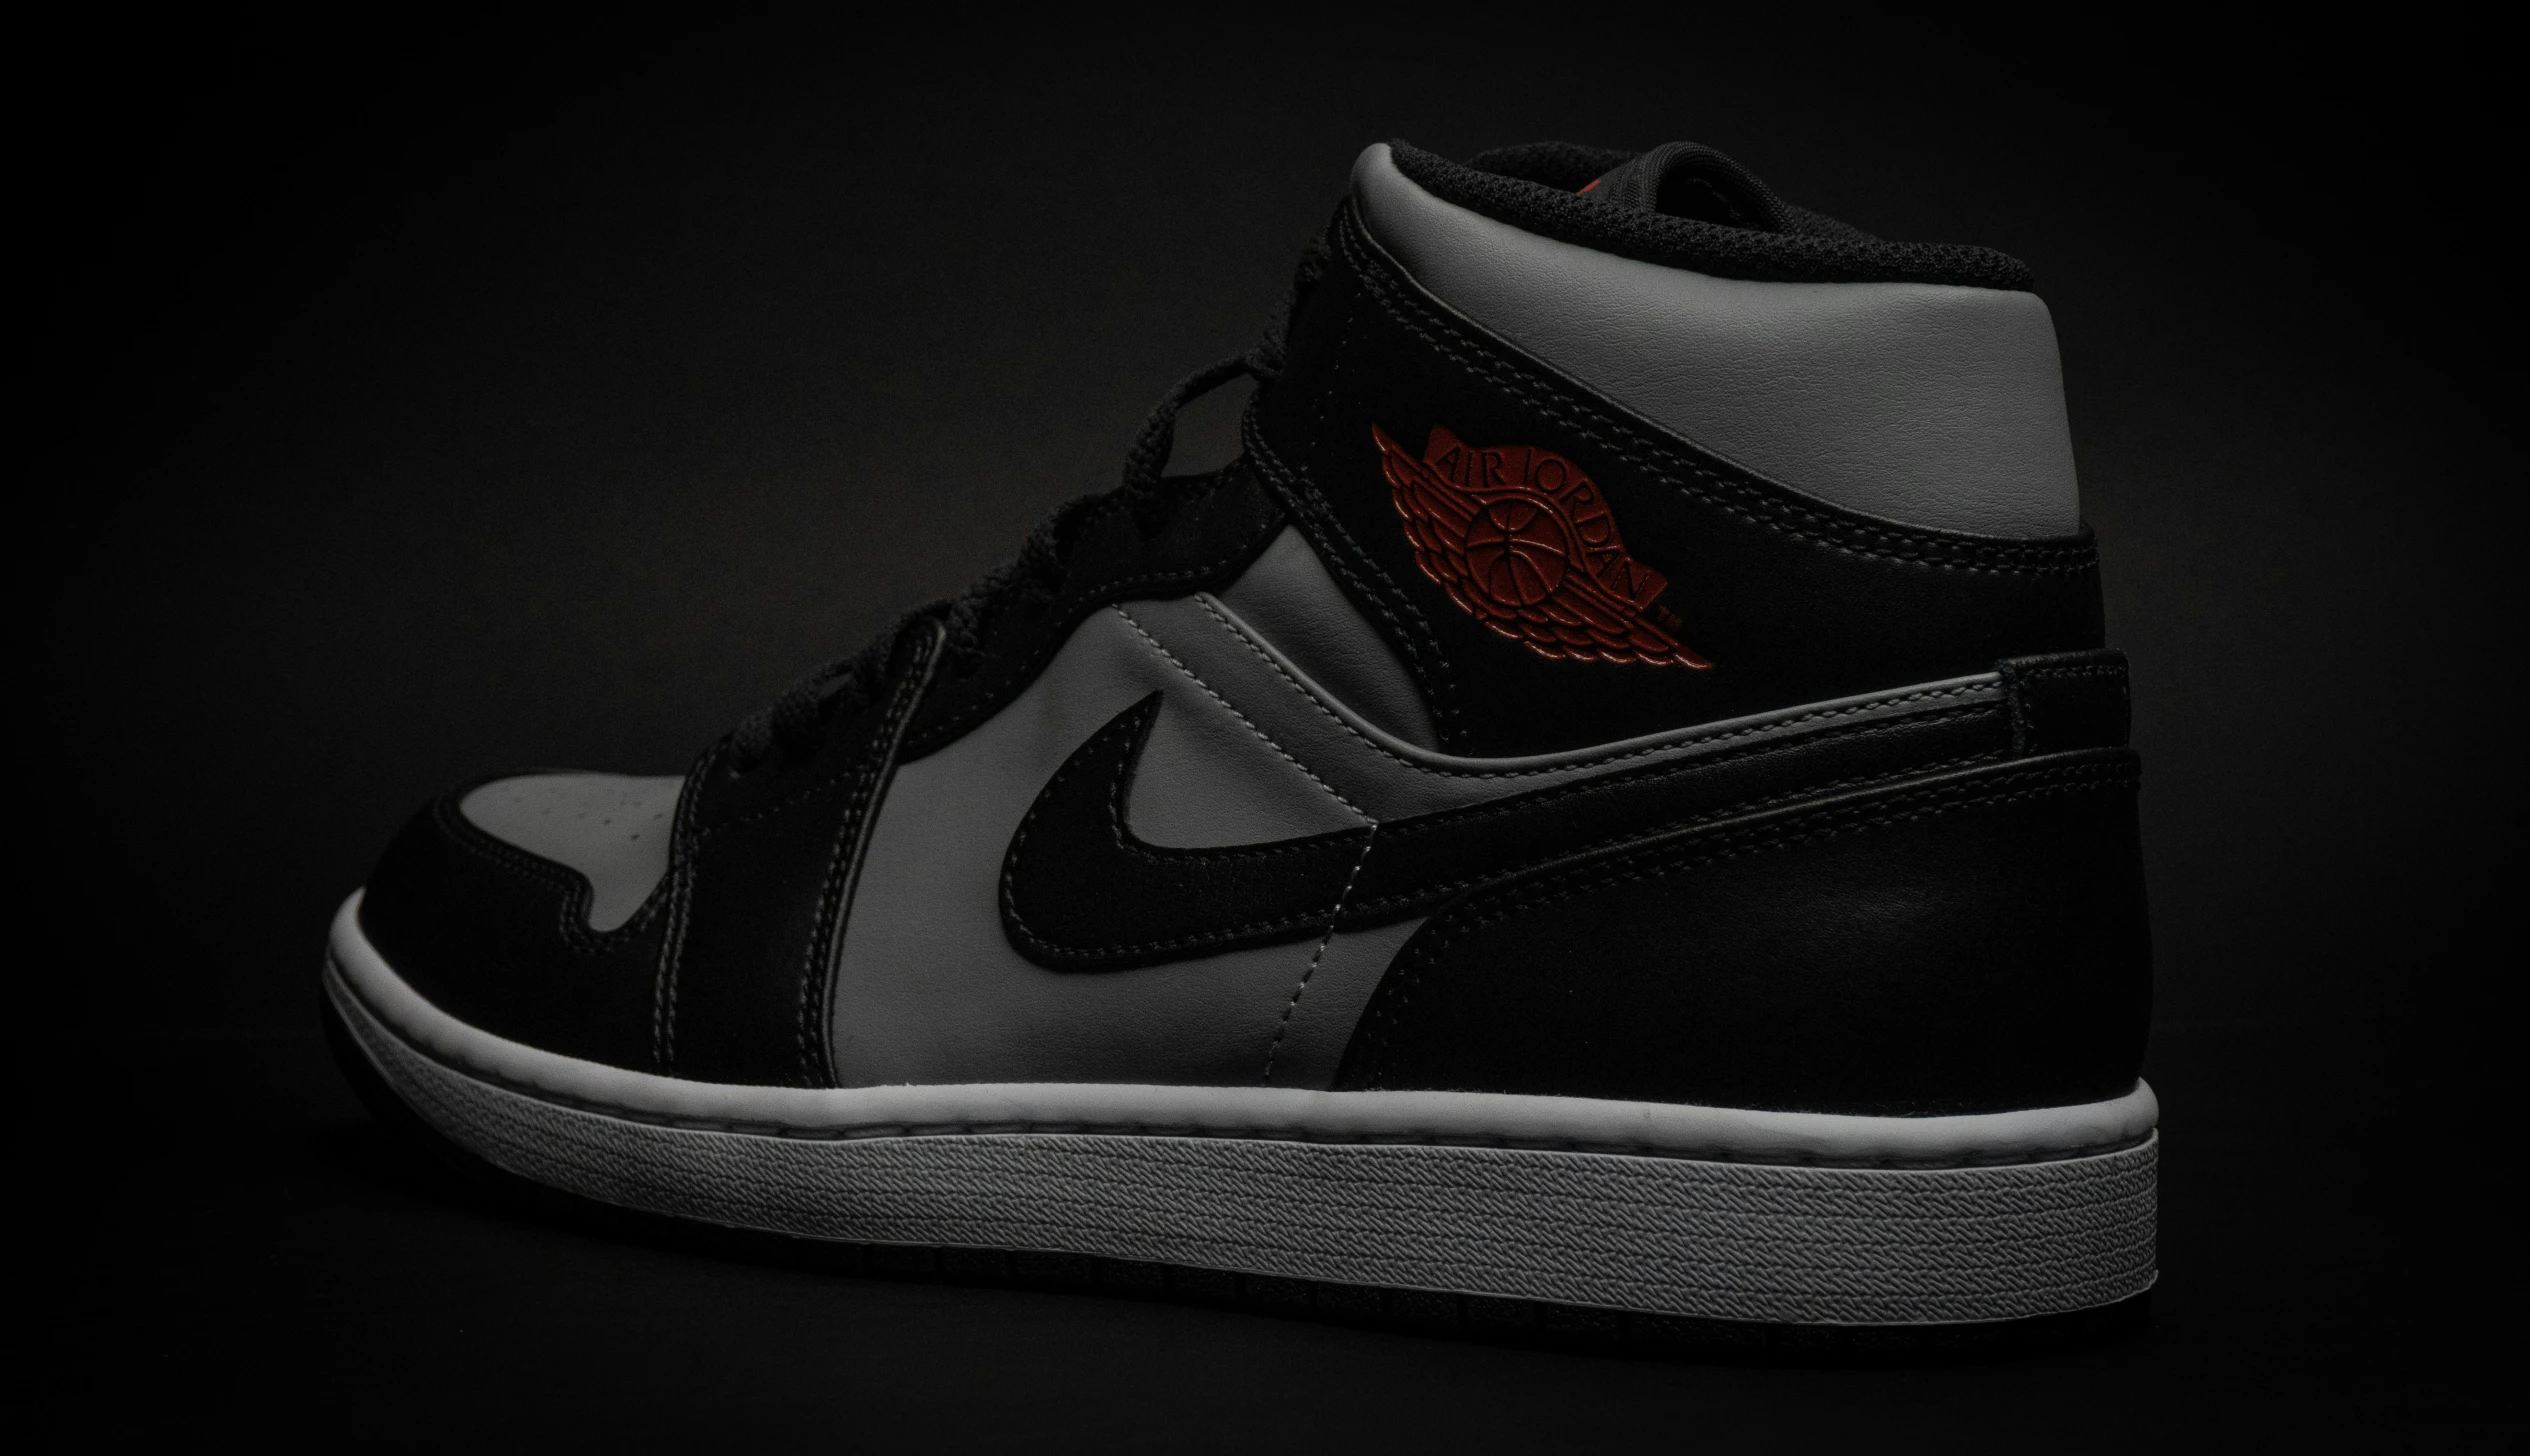 a pair of sneakers with a red - on - black bottom